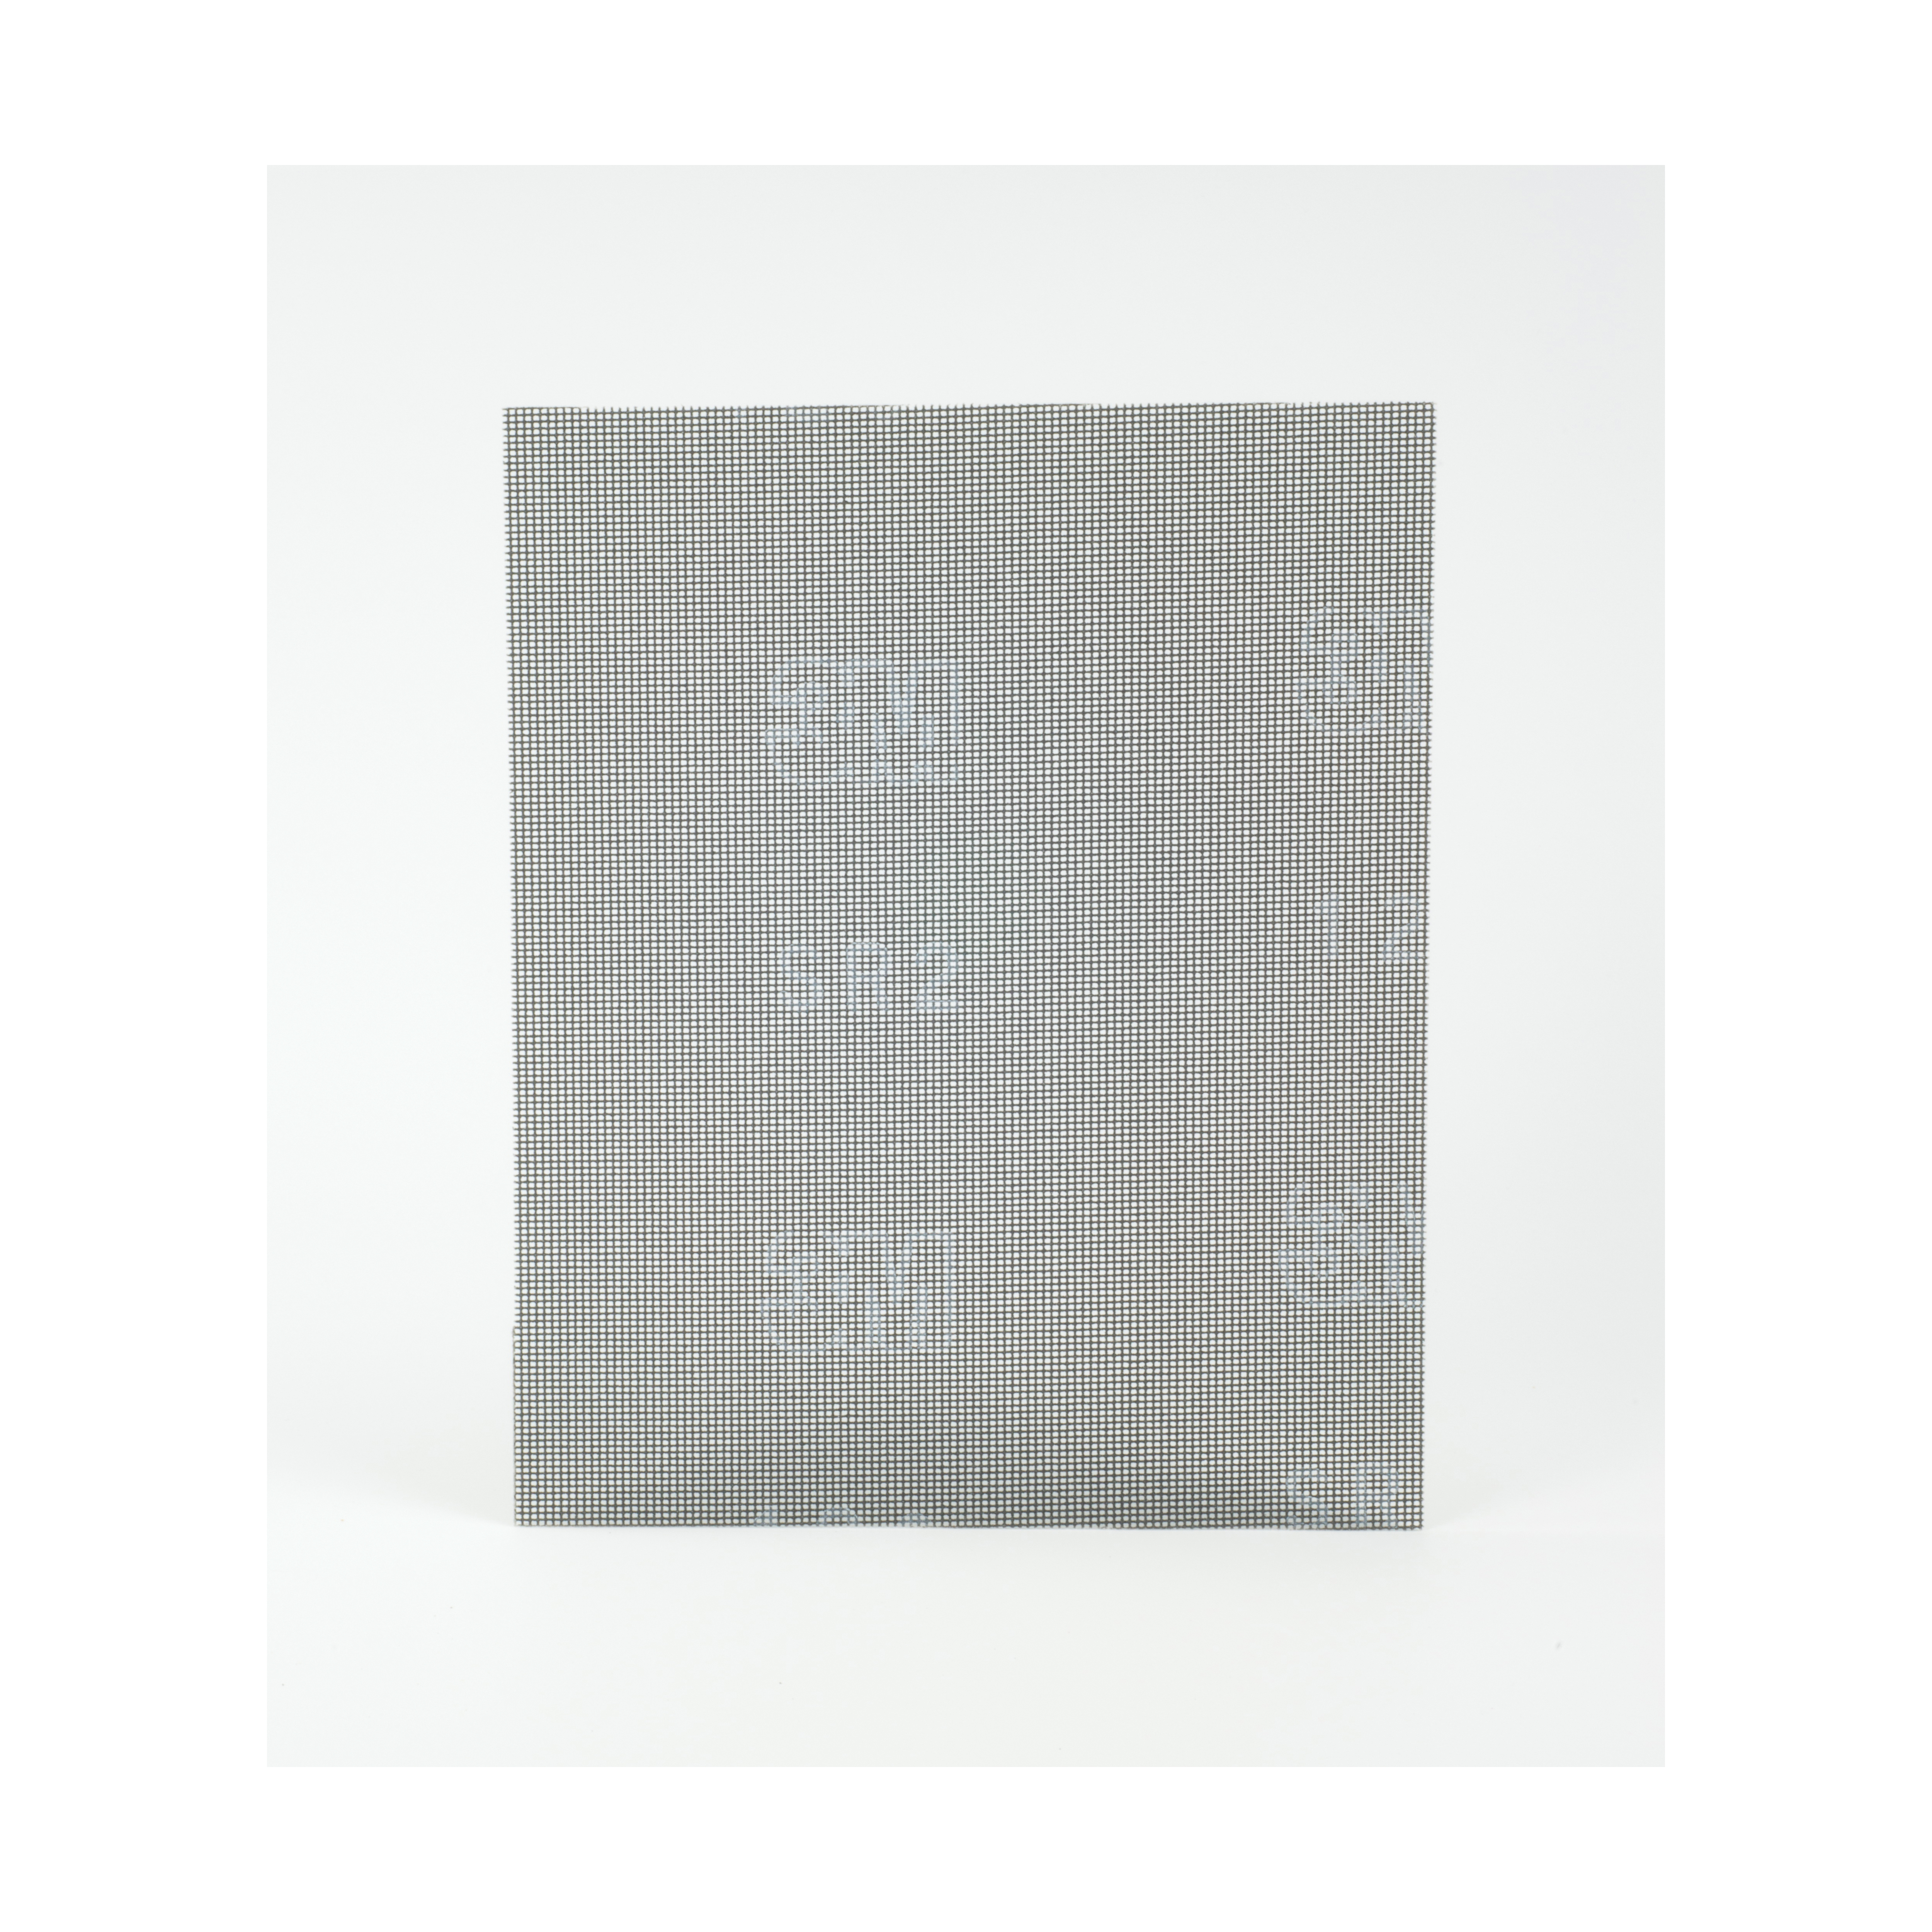 3M™ 051144-10460 483W Coated Sanding Sheet, 11 in L x 9 in W, 80 Grit, Medium Grade, Silicon Carbide Abrasive, Cloth Backing